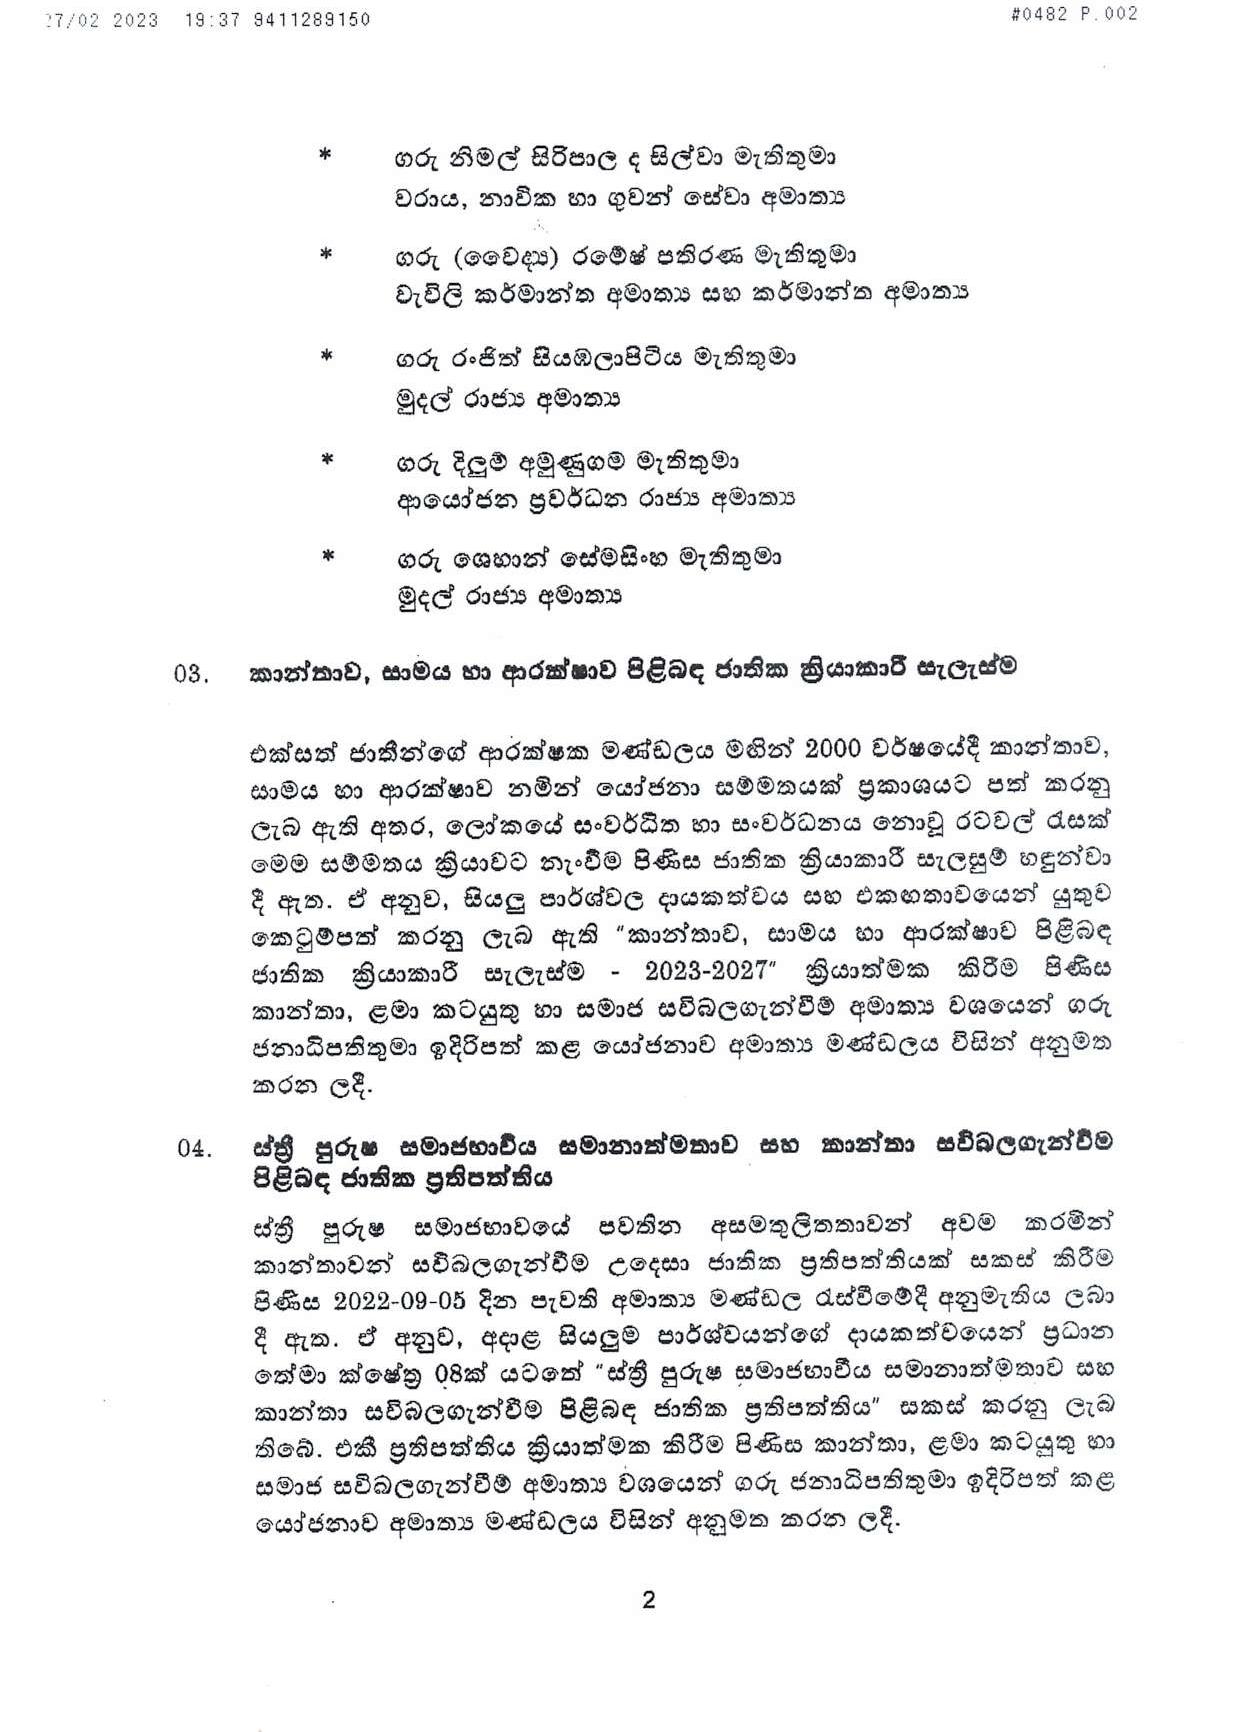 Cabinet Decision on 27.07.2023 page 002